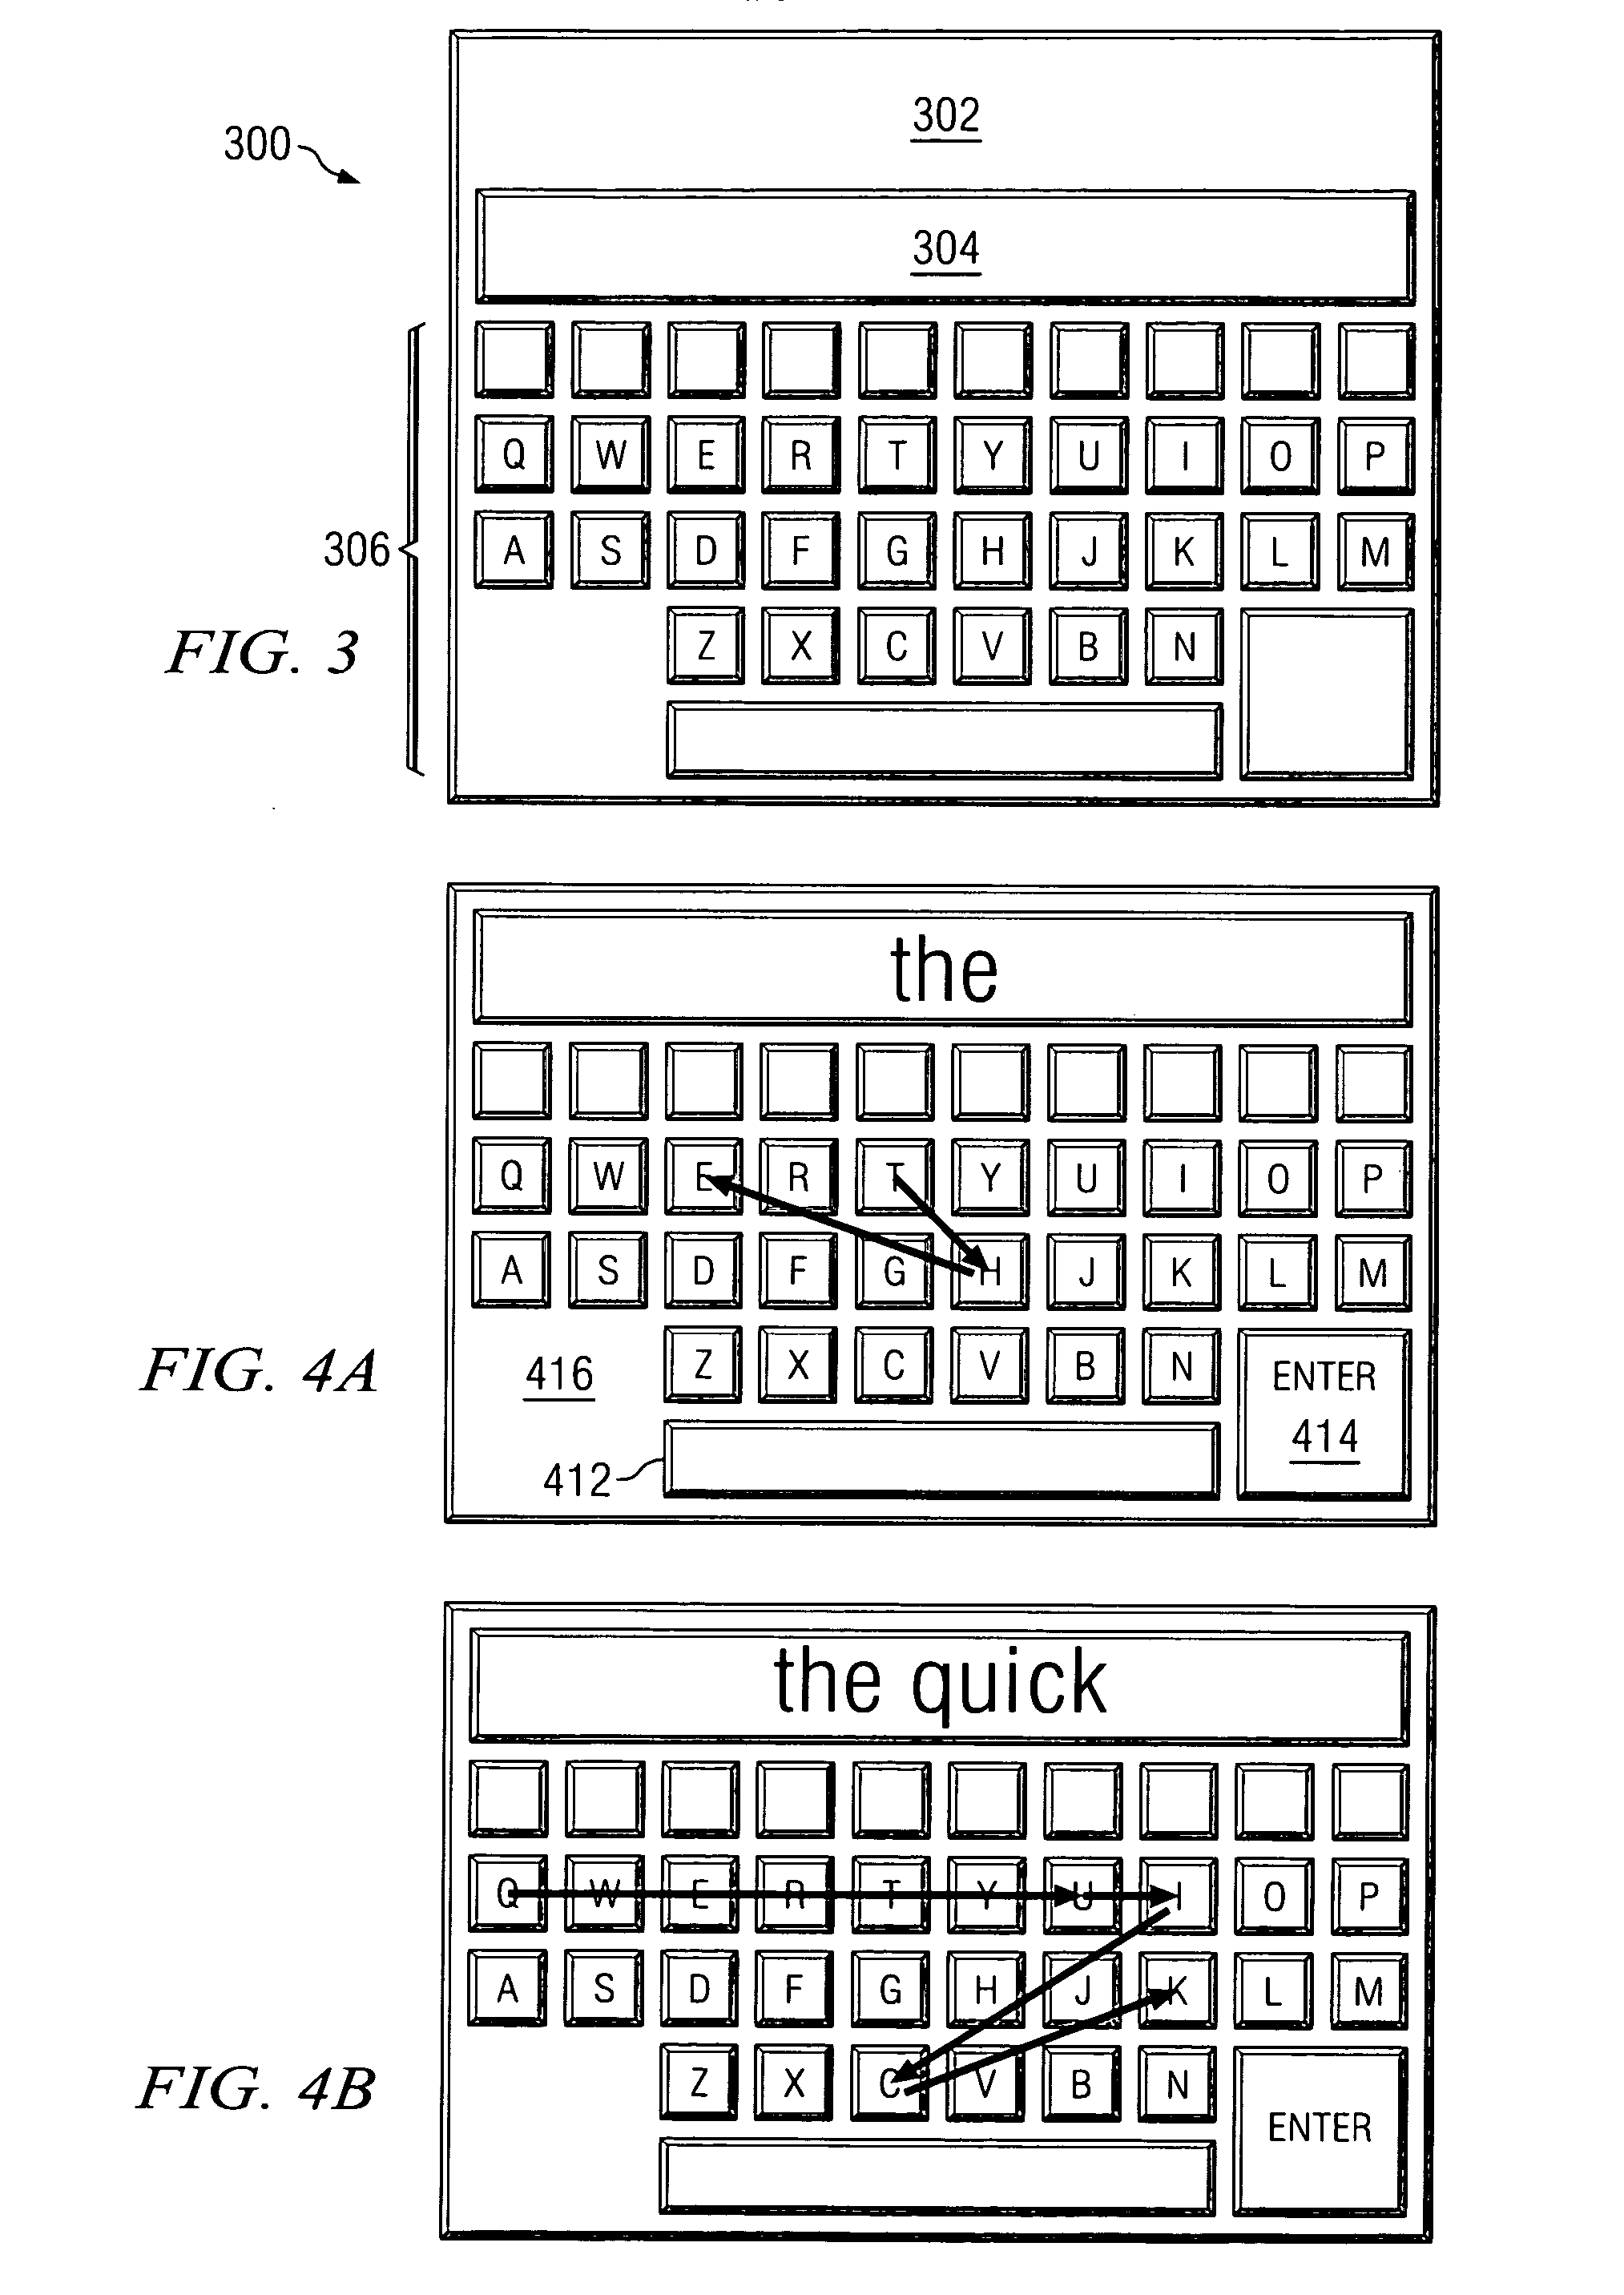 System and method for improved user input on personal computing devices